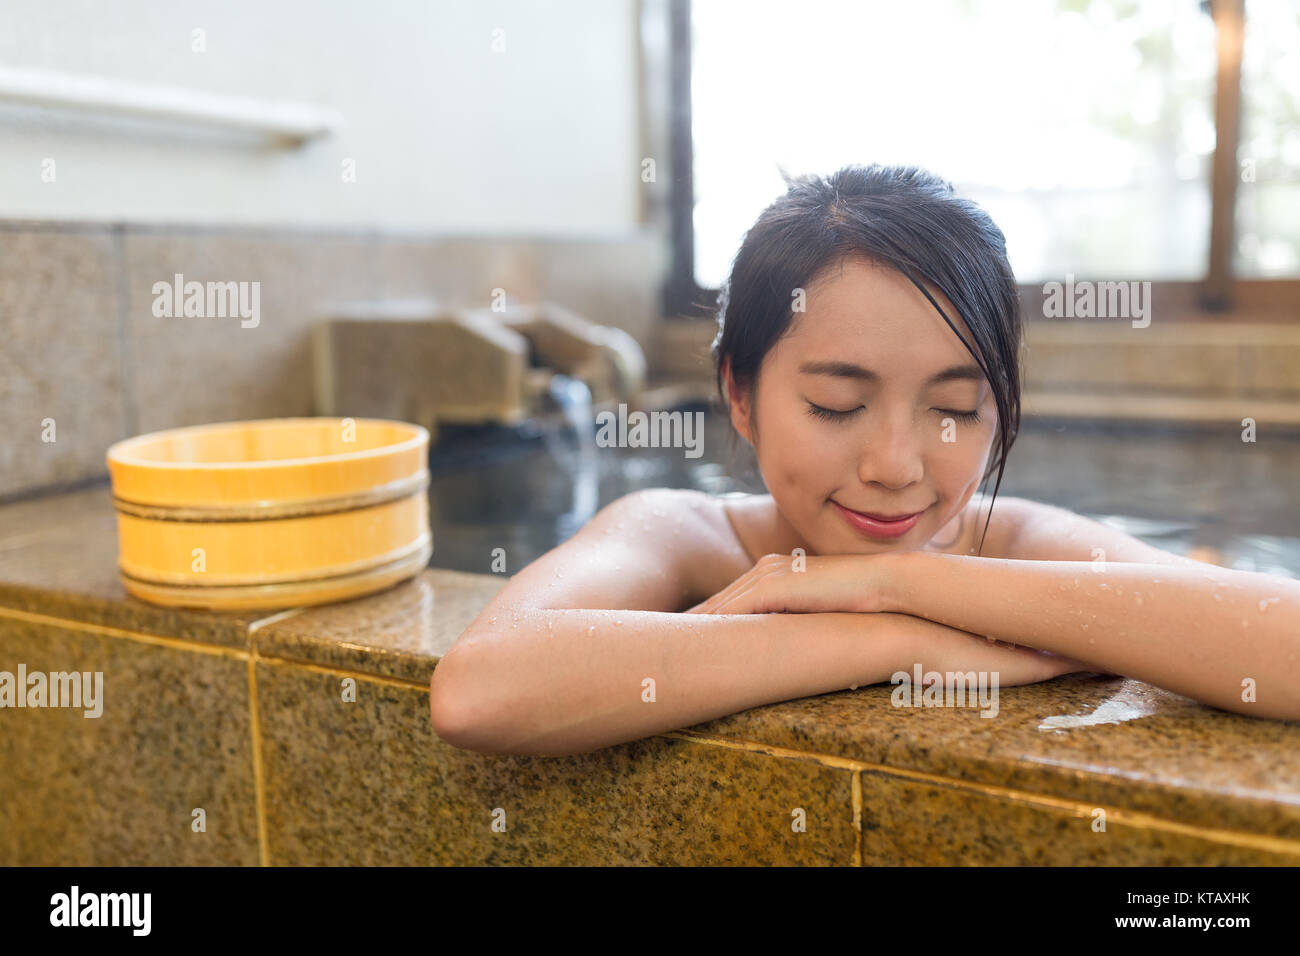 Bath Bucket With A Towel At A Hot Spring Bath At Japanese Onsen Stock  Photo, Picture and Royalty Free Image. Image 55005915.